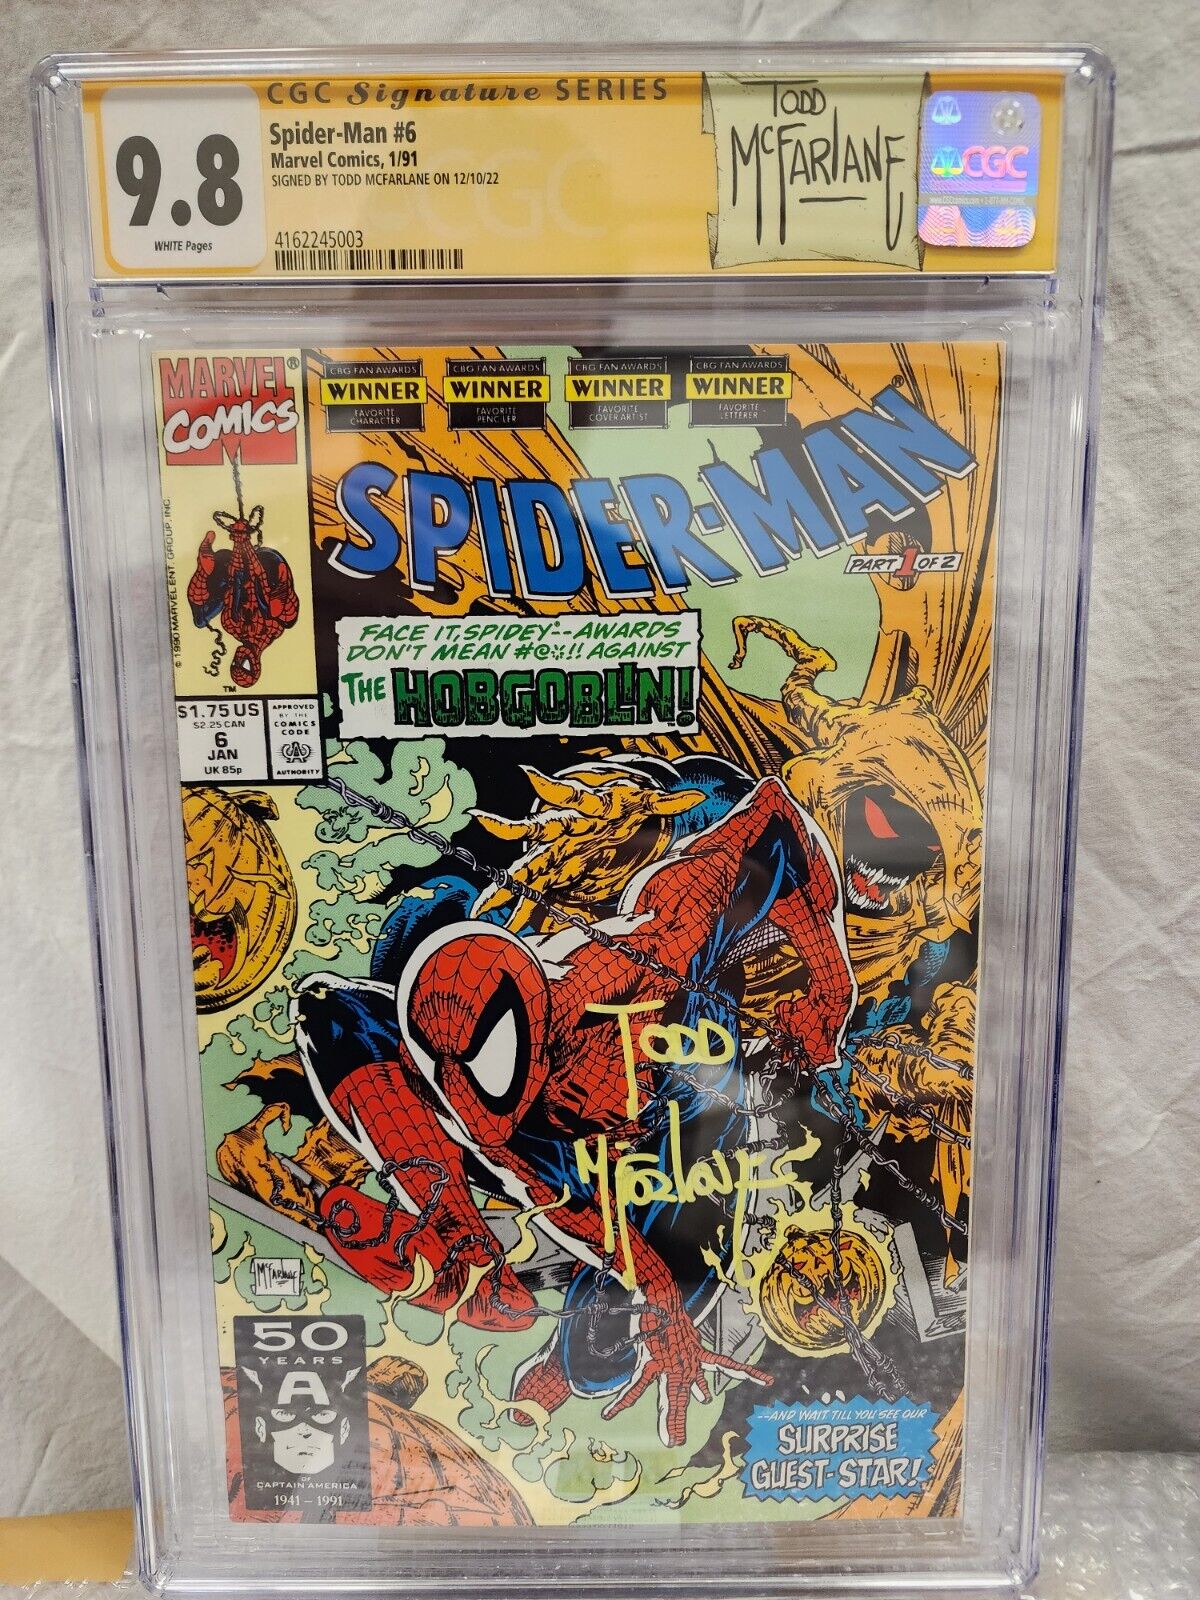 🔥  Spider-Man #6 CGC 9.8 SS Signed By Todd McFarlane Ghost Rider- Hobgoblin 1